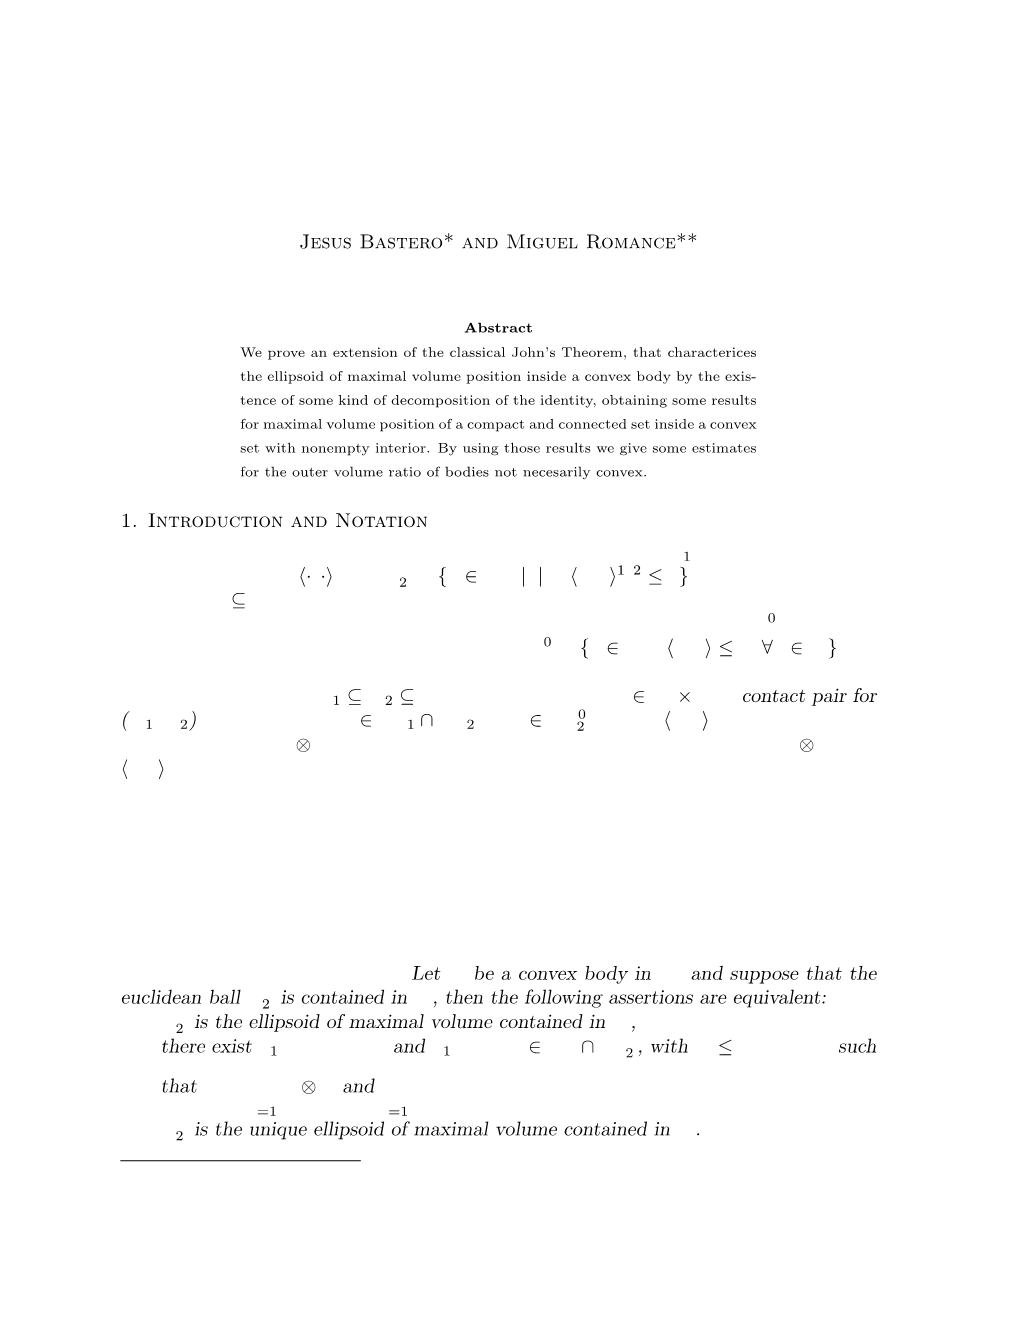 JOHN's DECOMPOSITION of the IDENTITY in the NON-CONVEX CASE Jesus Bastero* and Miguel Romance** 1. Introduction and Notation T